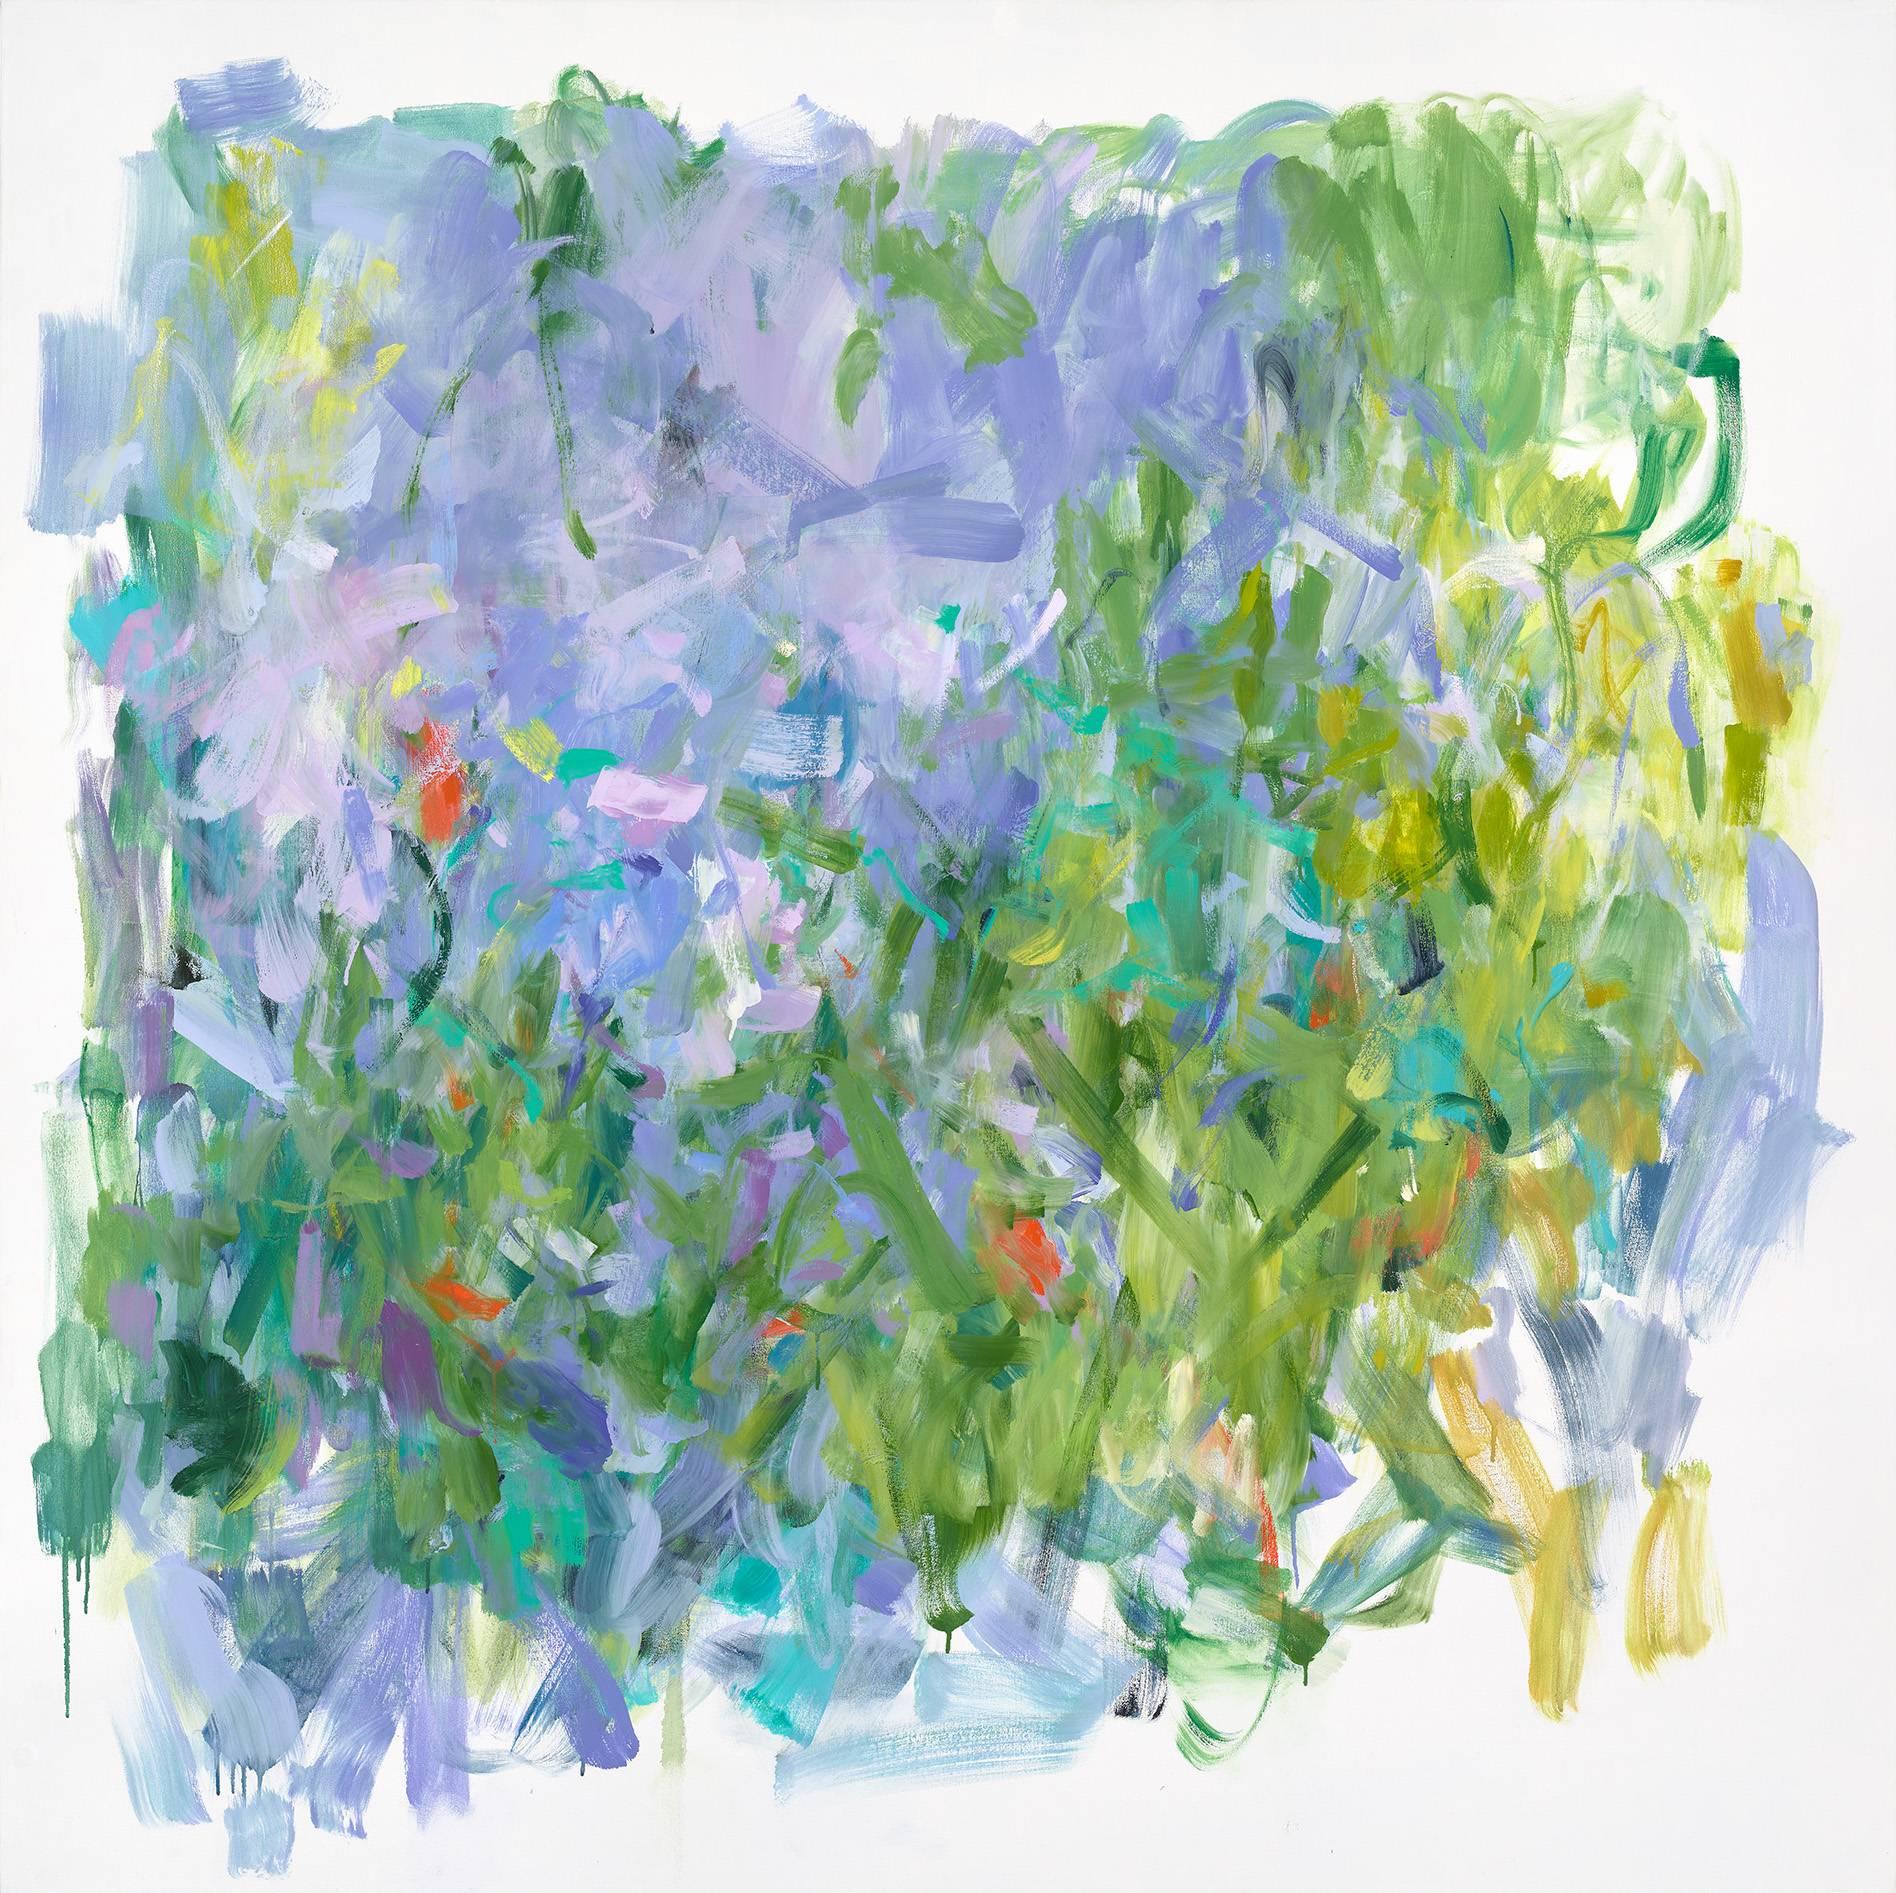 Yolanda Sanchez Abstract Painting - The Happiness of Birds, Grass Green, Lavender, Periwinkle, Lilac, Teal, Hunter